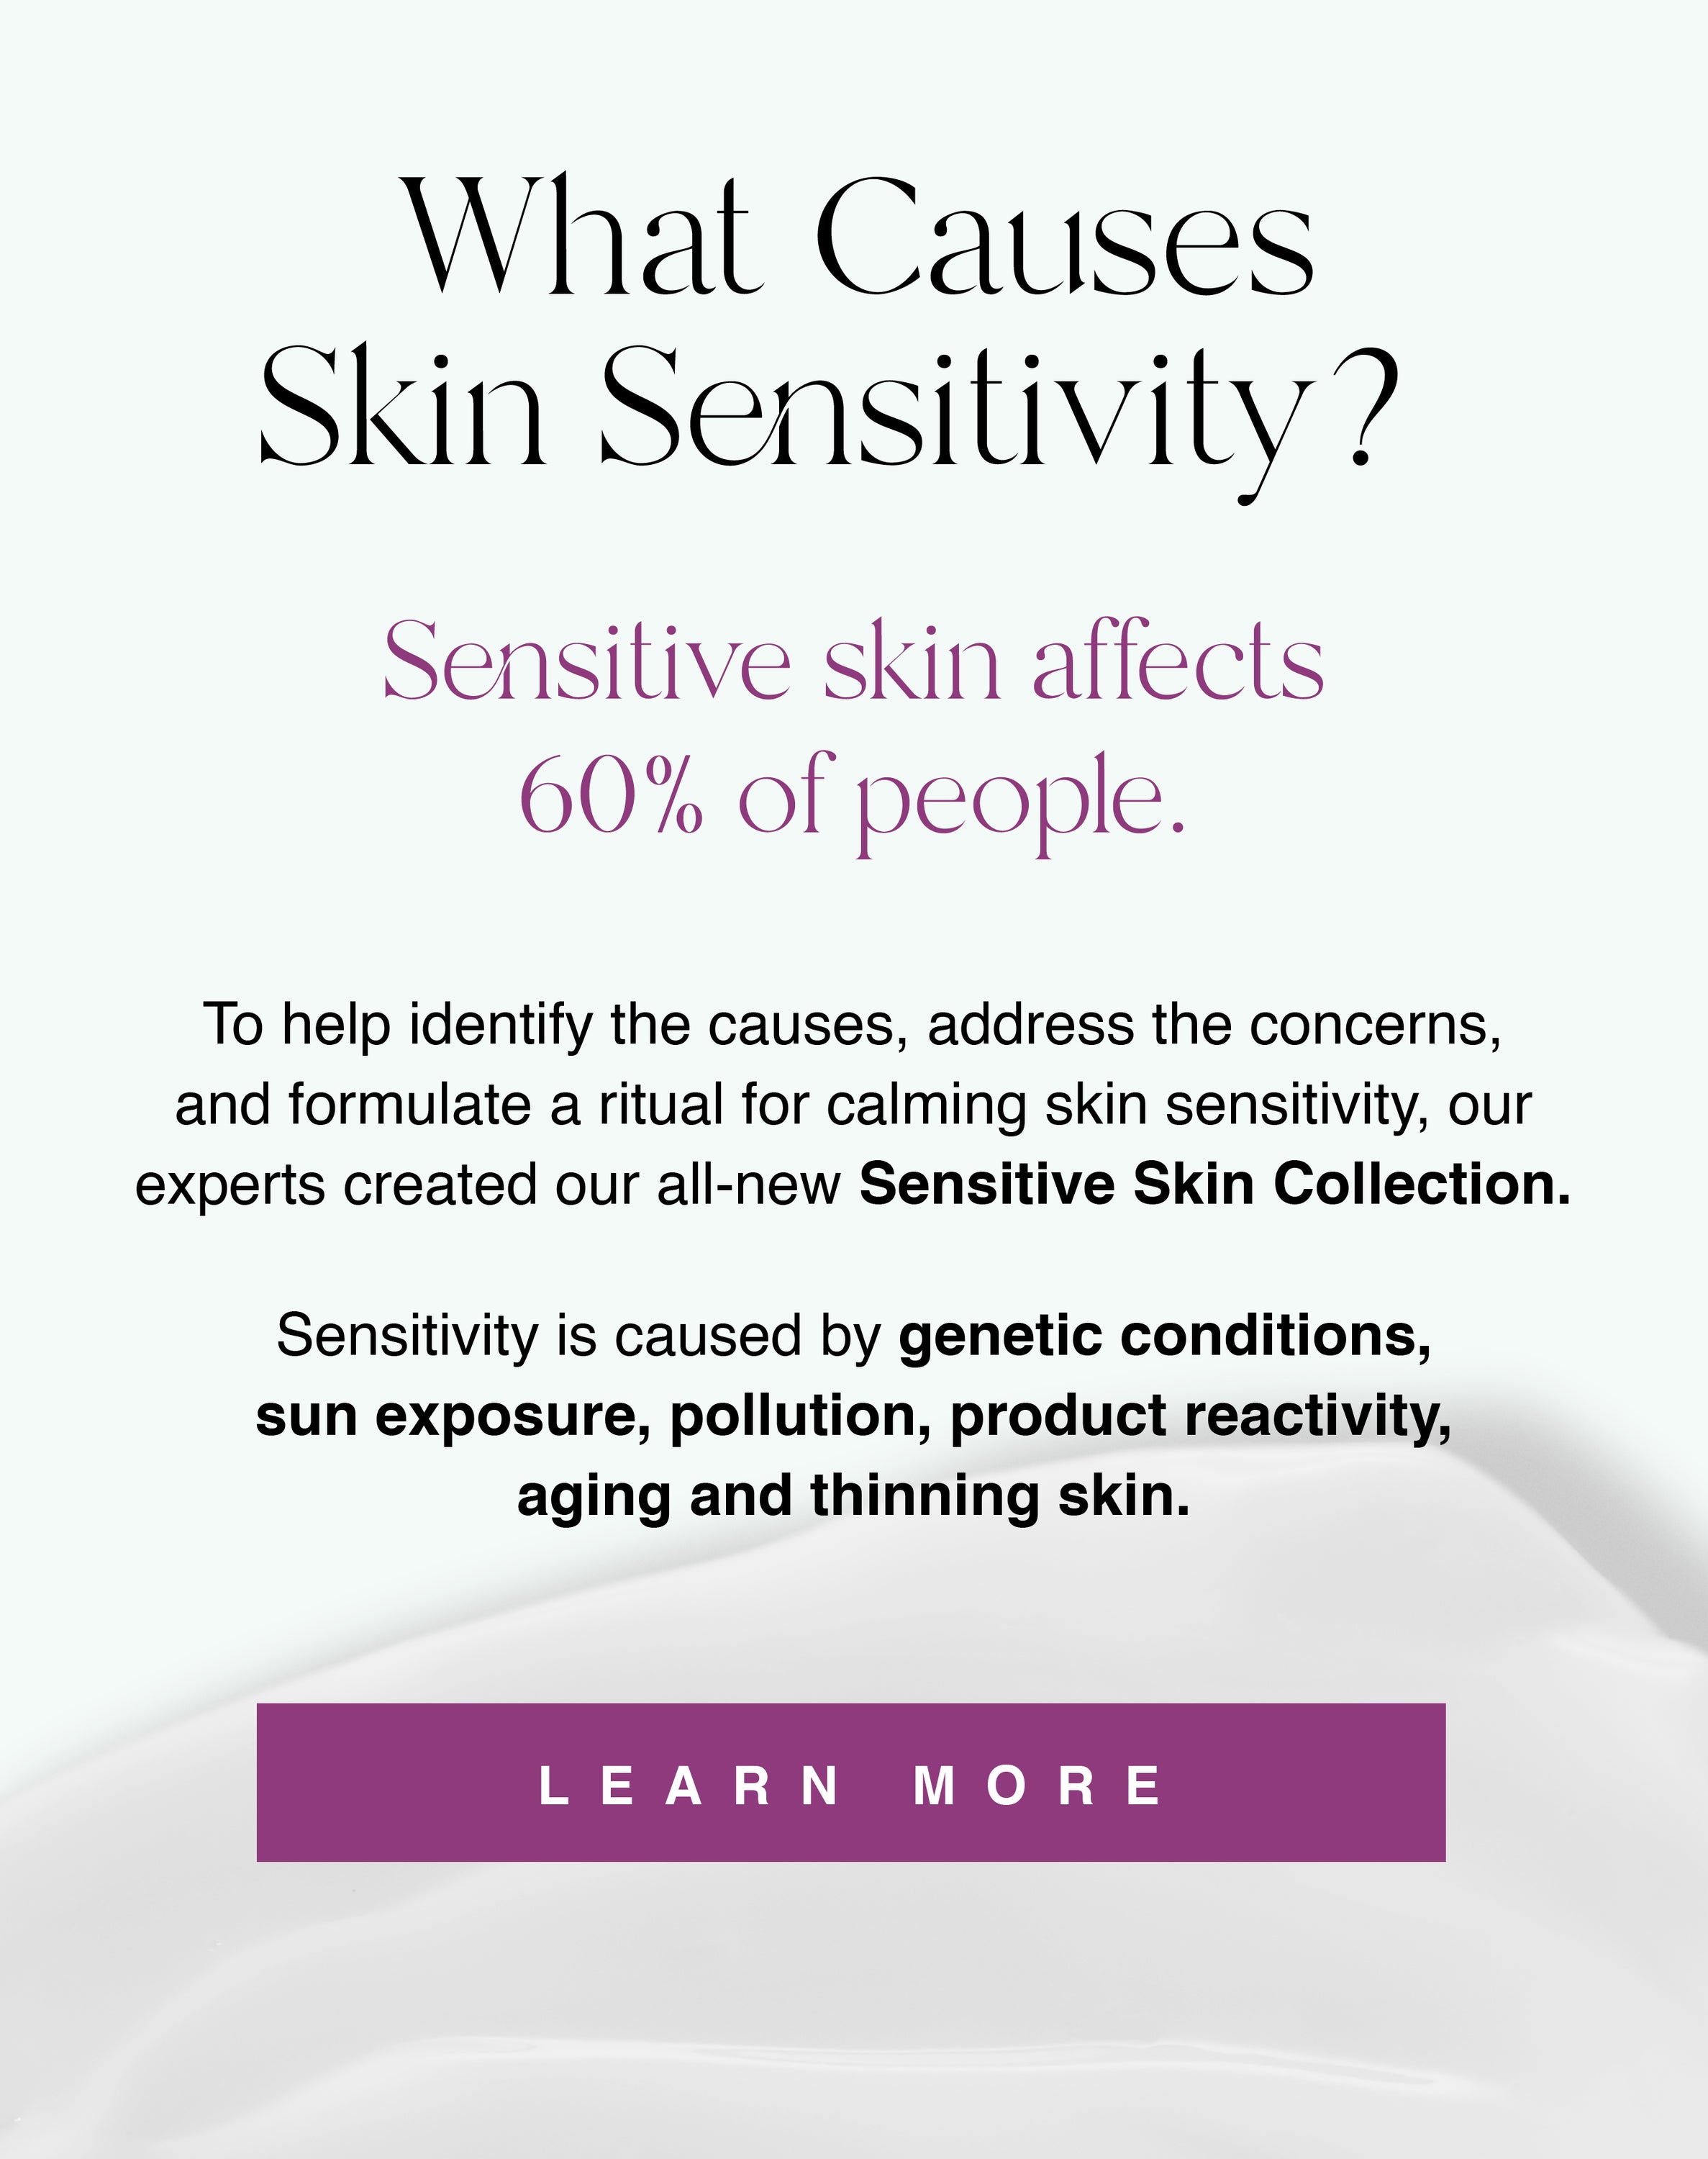 Image of What Causes Skin Sensitivity? Sensitive skin affects 60% of people. To help identify the causes, address the concerns, and formulate a ritual for calming skin sensitivity, our experts created our all-new Sensitive Skin Collection. 